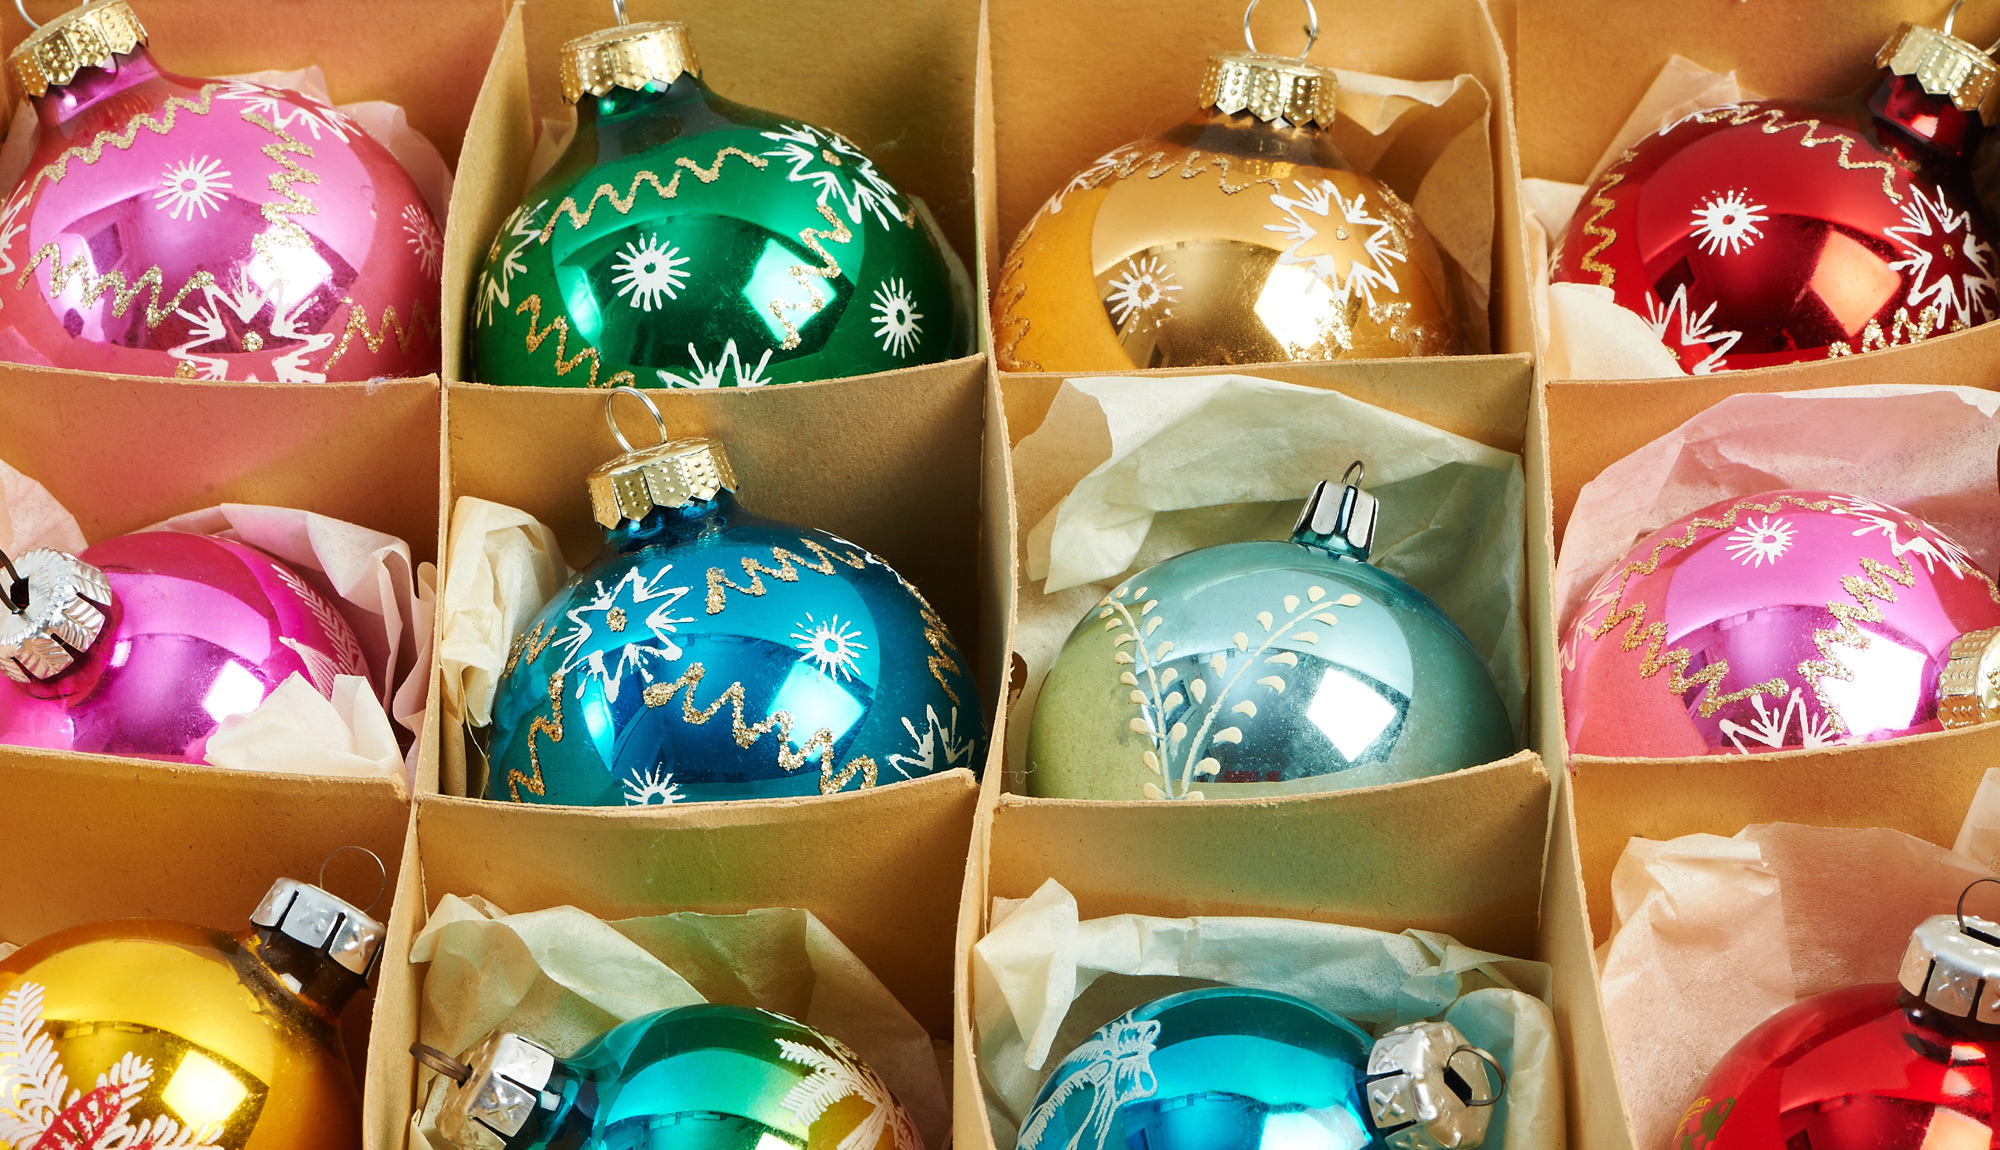 Putting Away Christmas: How to Organize Your Holiday Decorations